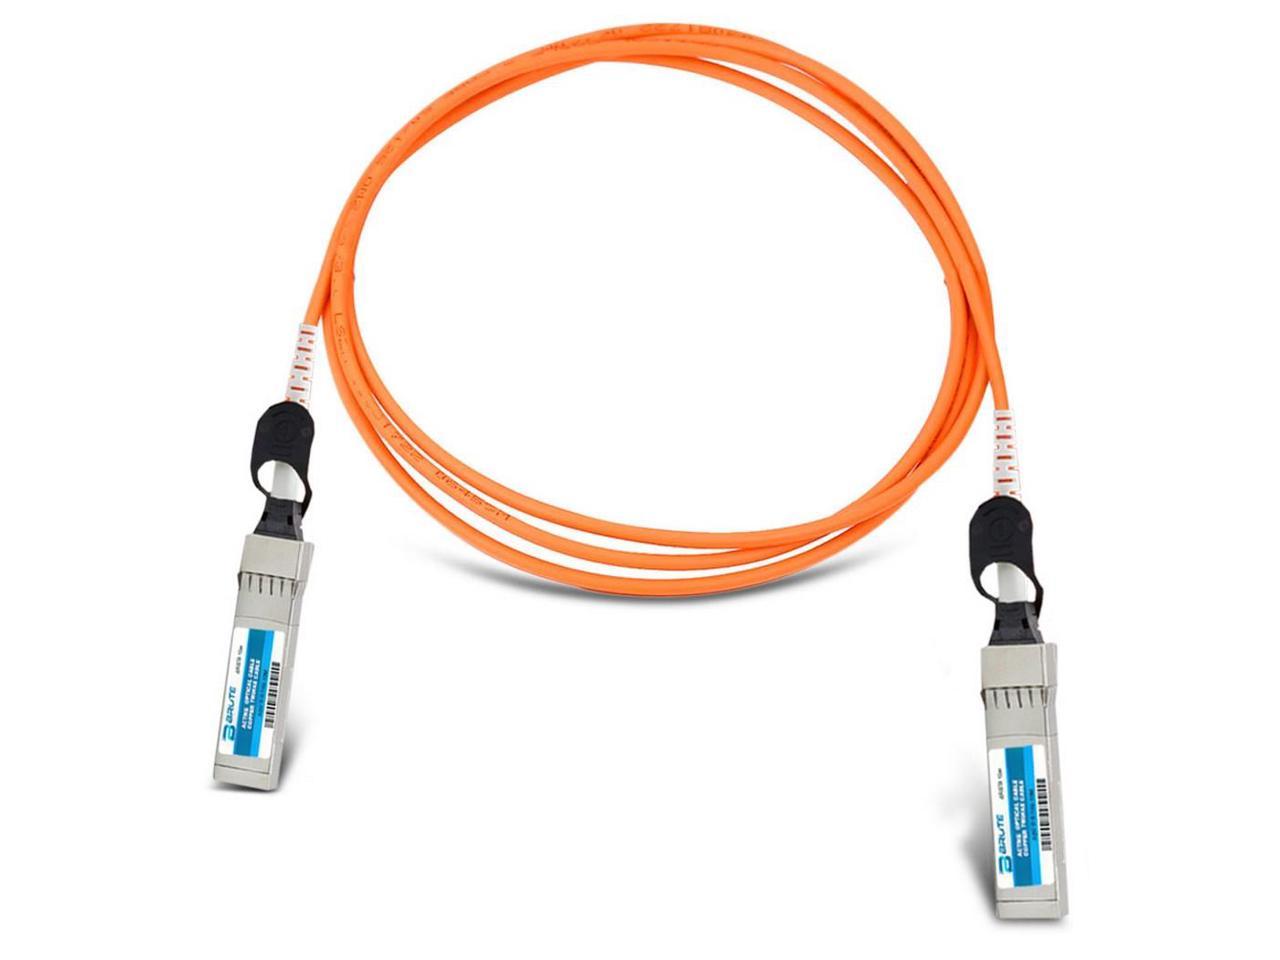 Active Optical Cable Compatible with OEM PN# QSFP-H40G-AOC15M 15m QSFP to QSFP Brute Networks QSFP-H40G-AOC15M-BN